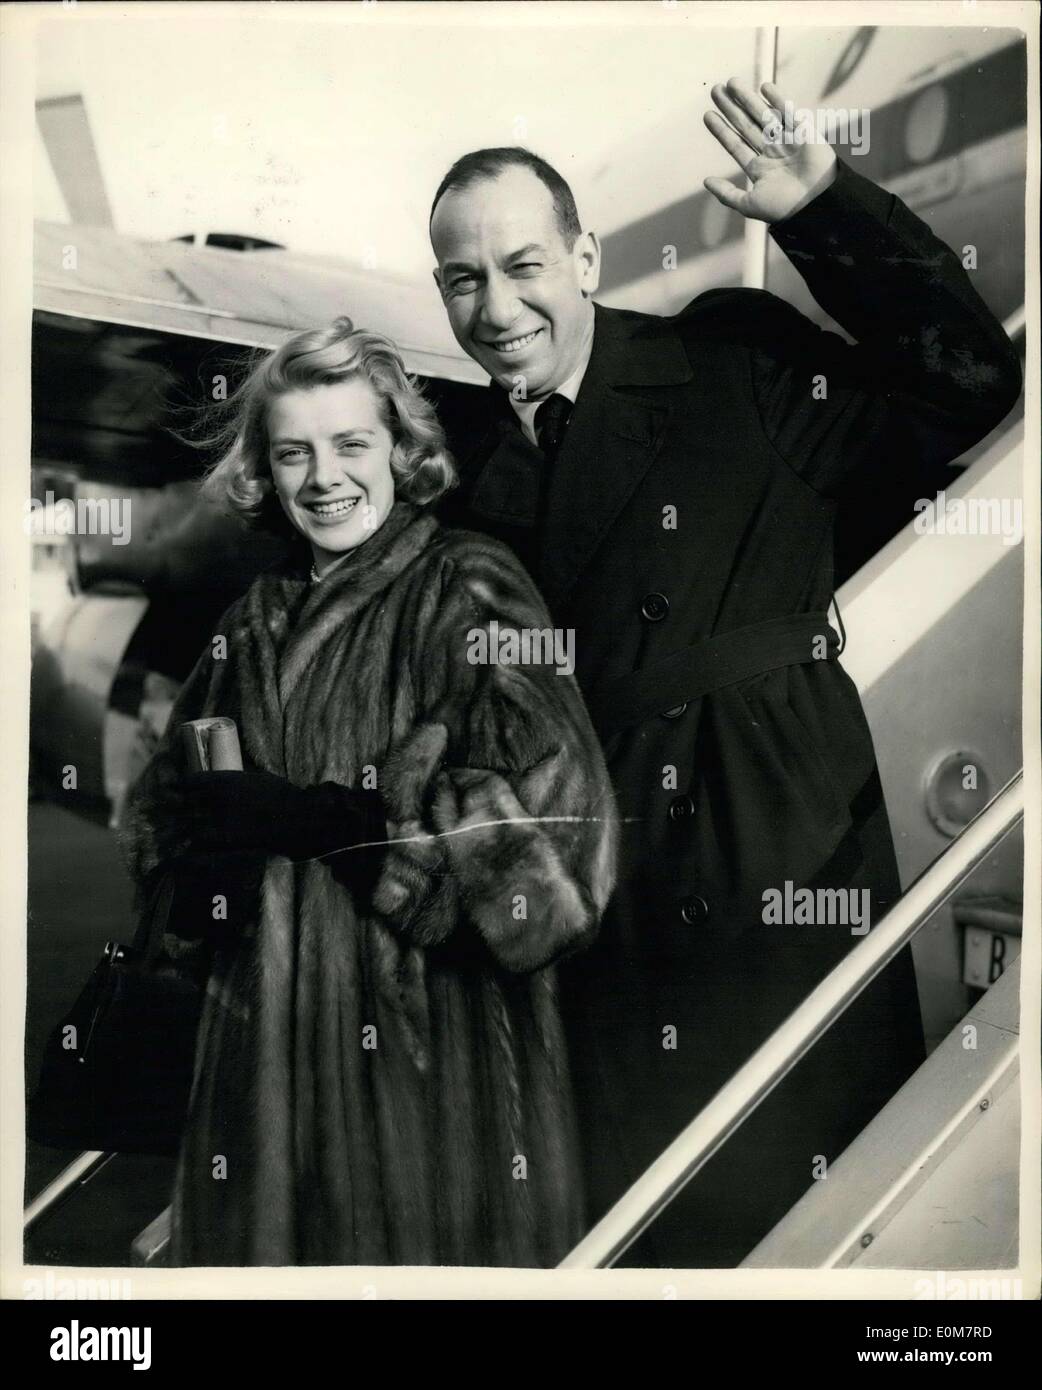 Jan. 05, 1954 - Rosemary Clooney And Husband Jose Ferrer Arrive In London: Among the arrivals at London Airport this morning were America's latest Singing success - Rosemary Clooney and her actor husband Jose Ferrer. They were married six months ago - and the visit is being used as a belated honeymoon. Miss Clooney leaped to fame with her recording of ''Come On-a My House'' - and has appeared in a number of films. Photo shows Rosemary Clooney and husband Jose Ferrer their arrival at London Airport this morning. Stock Photo